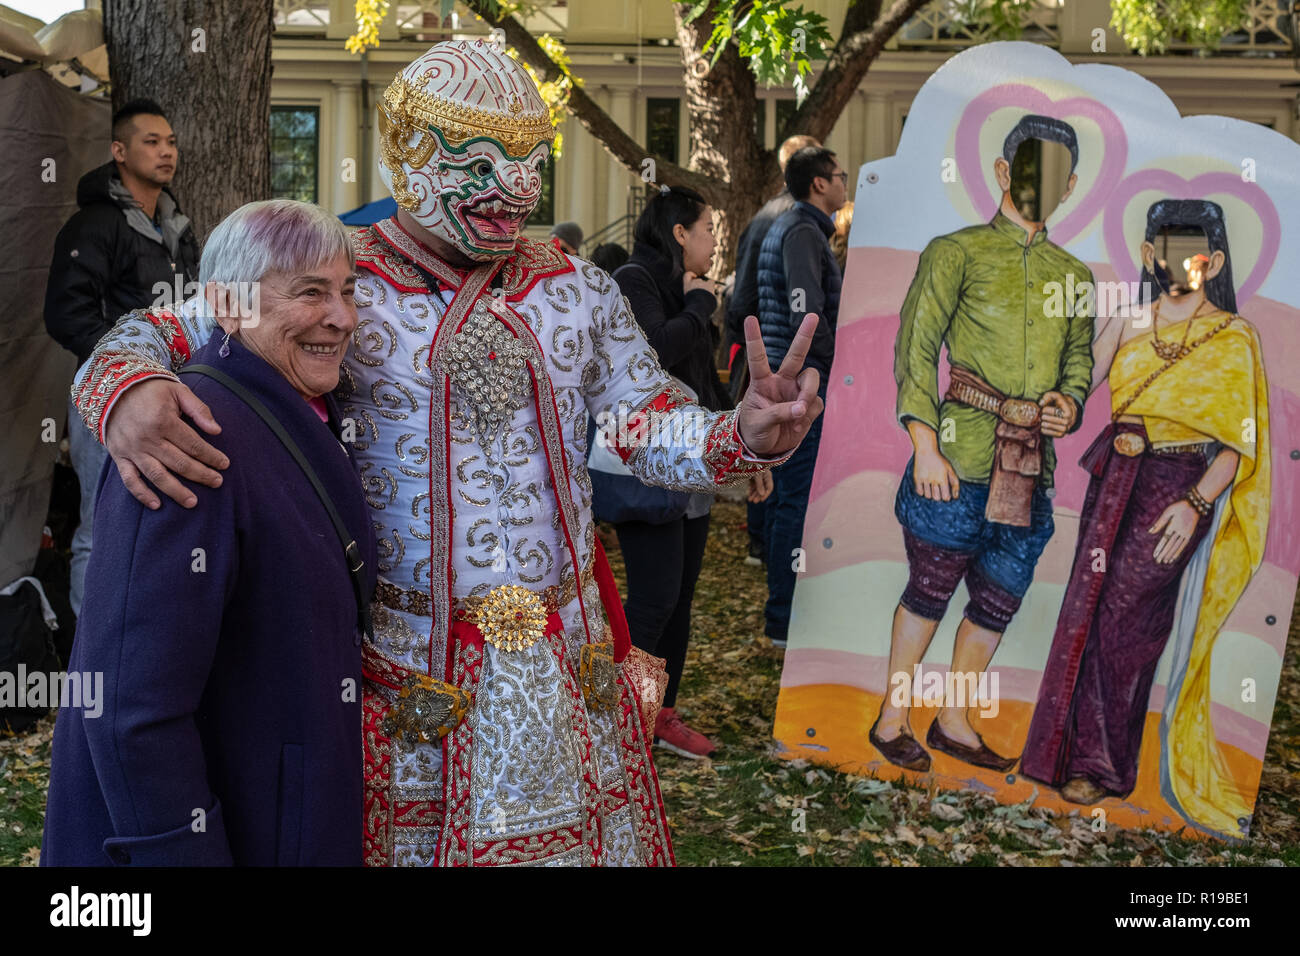 A woman having her photograph taken with a performer at the Thai Festival in Harvard Square Stock Photo